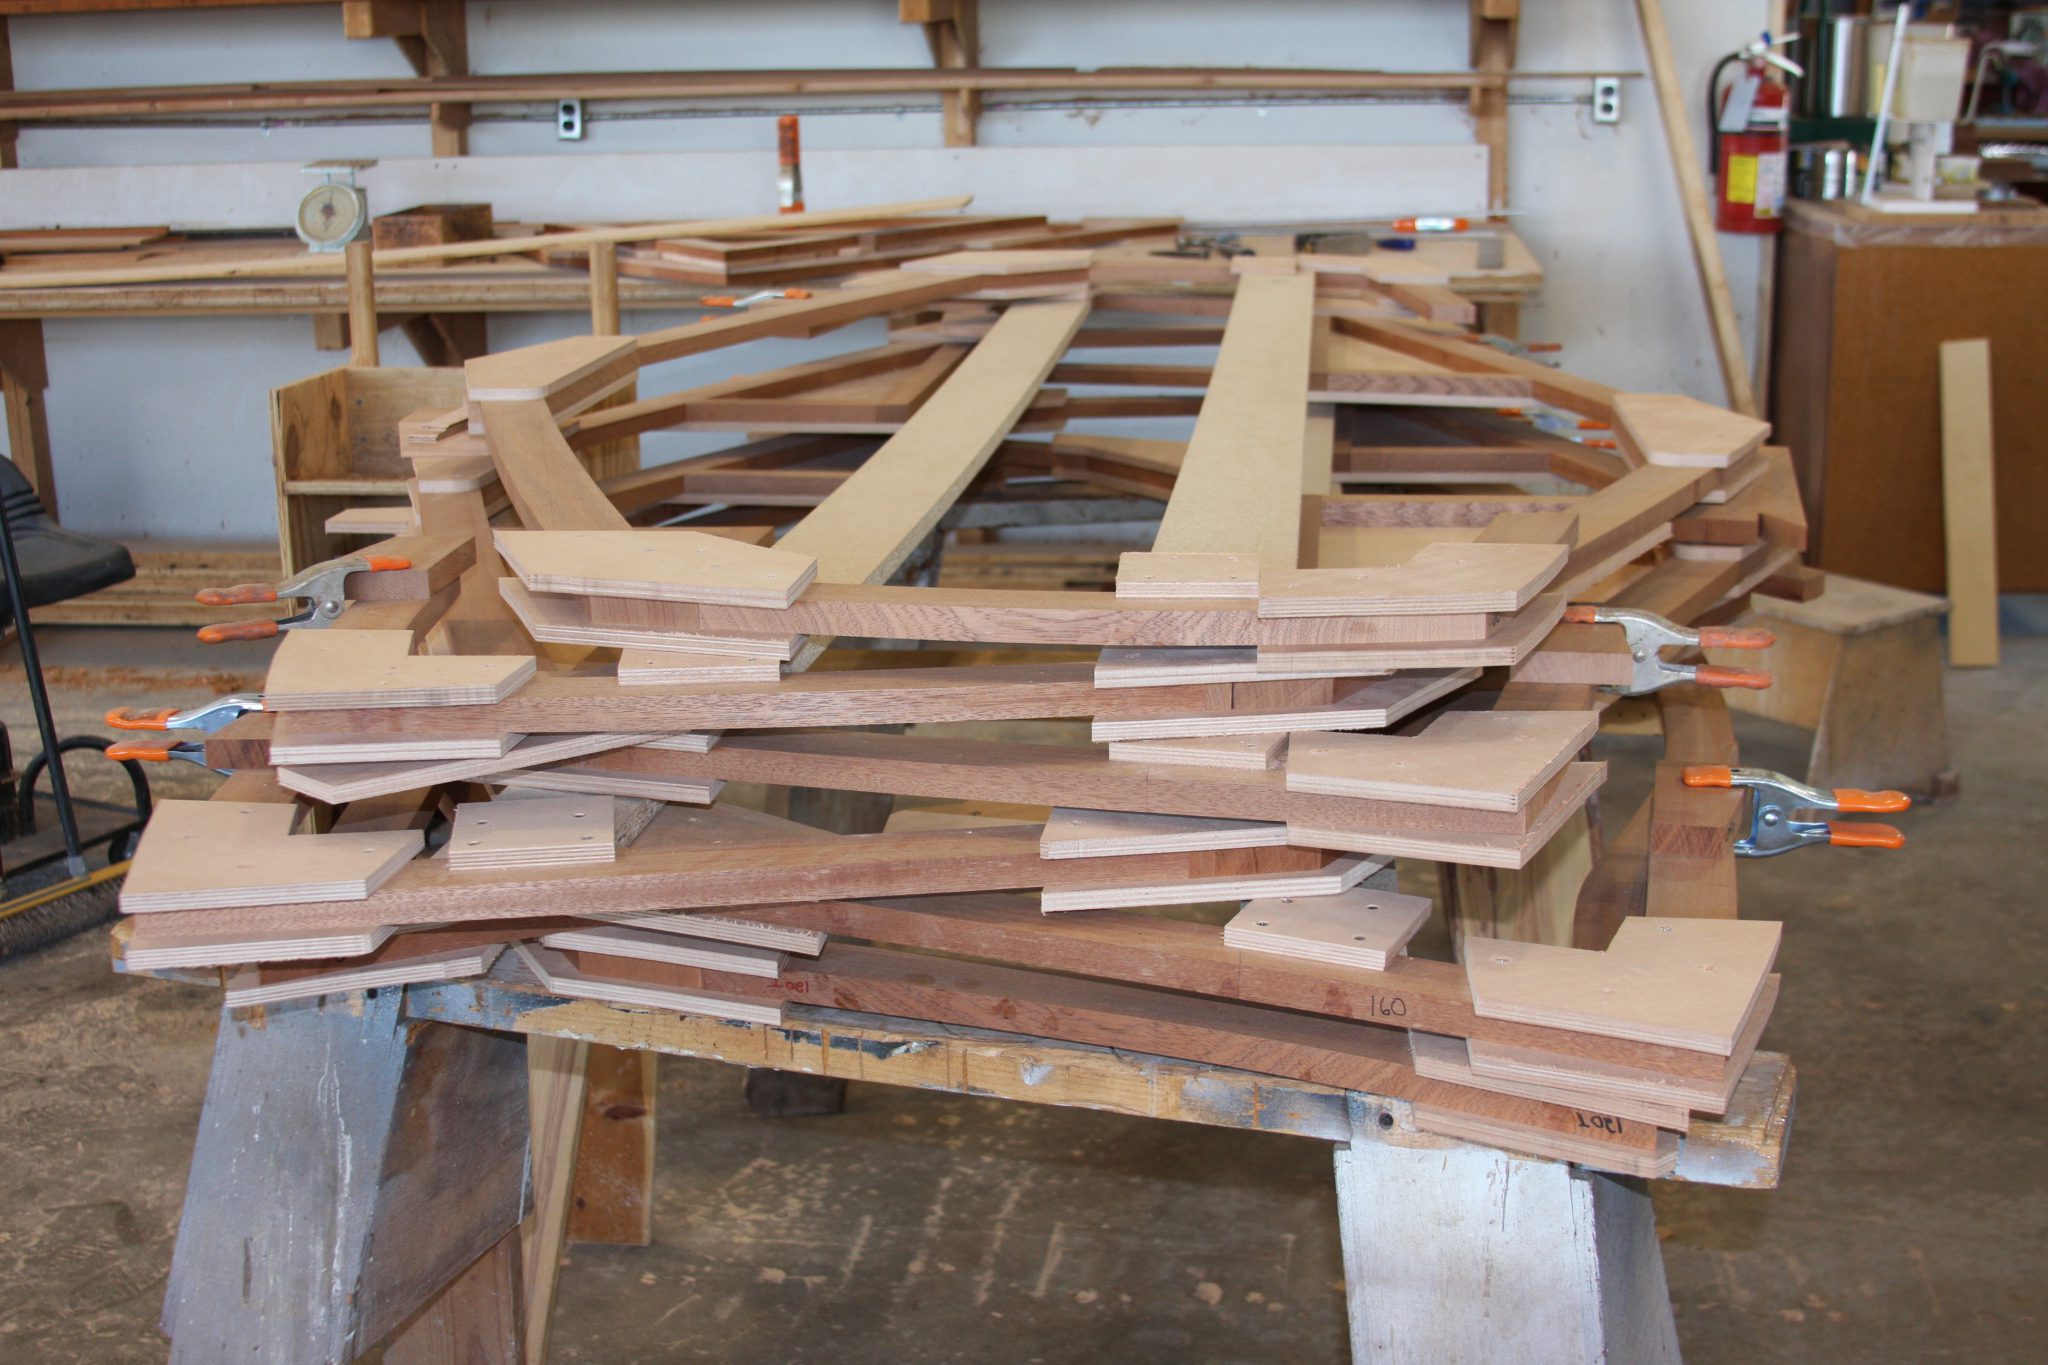 assembled frames ready for hull construction